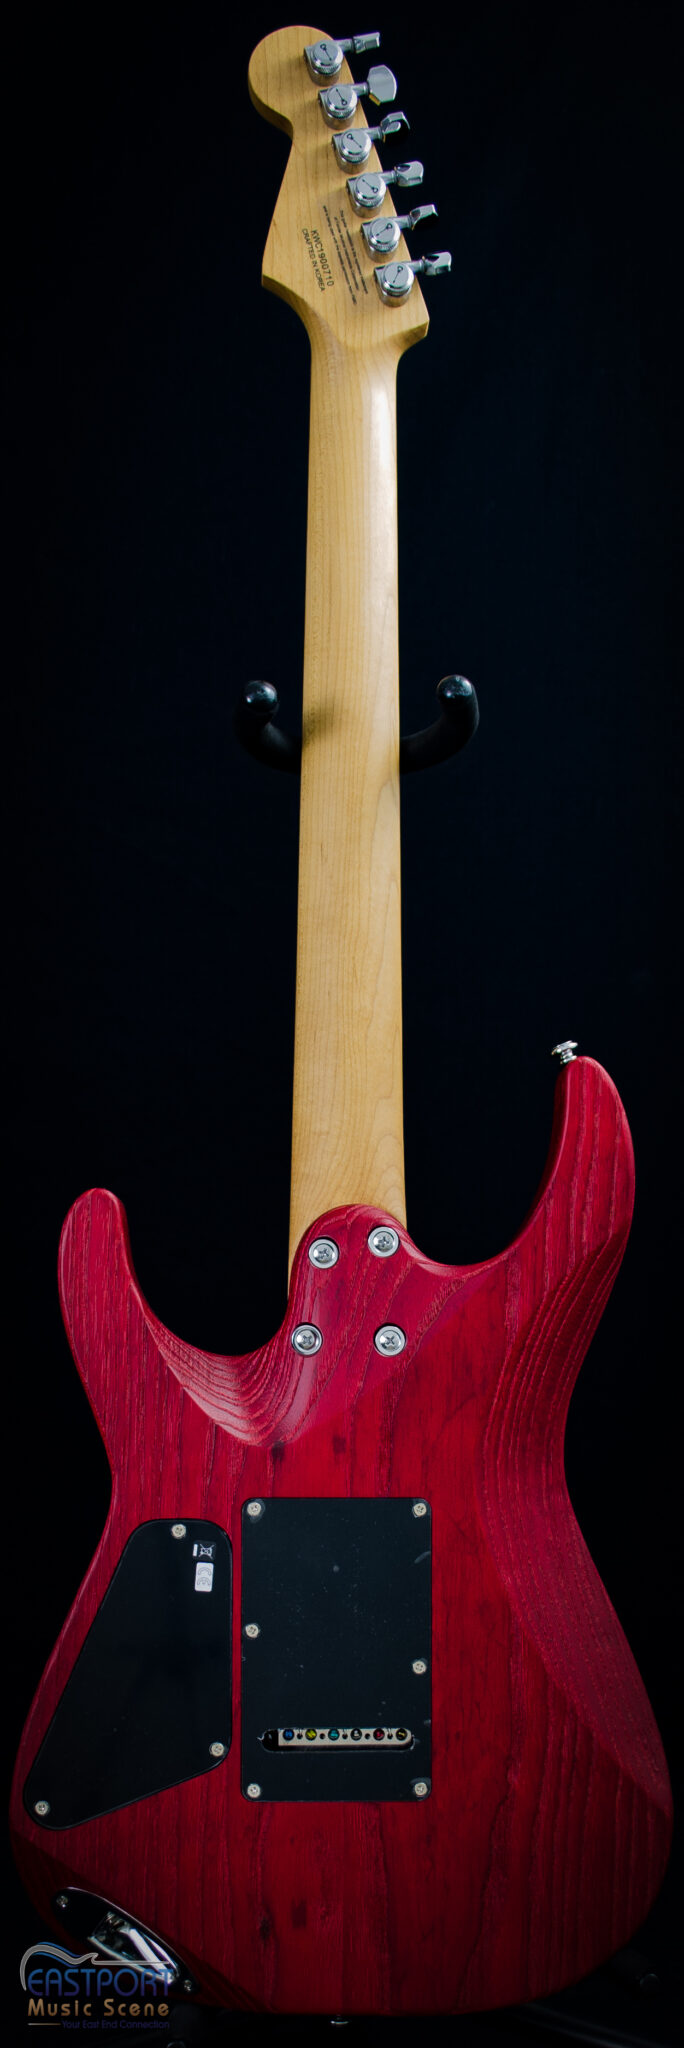 A red electric guitar with a black background